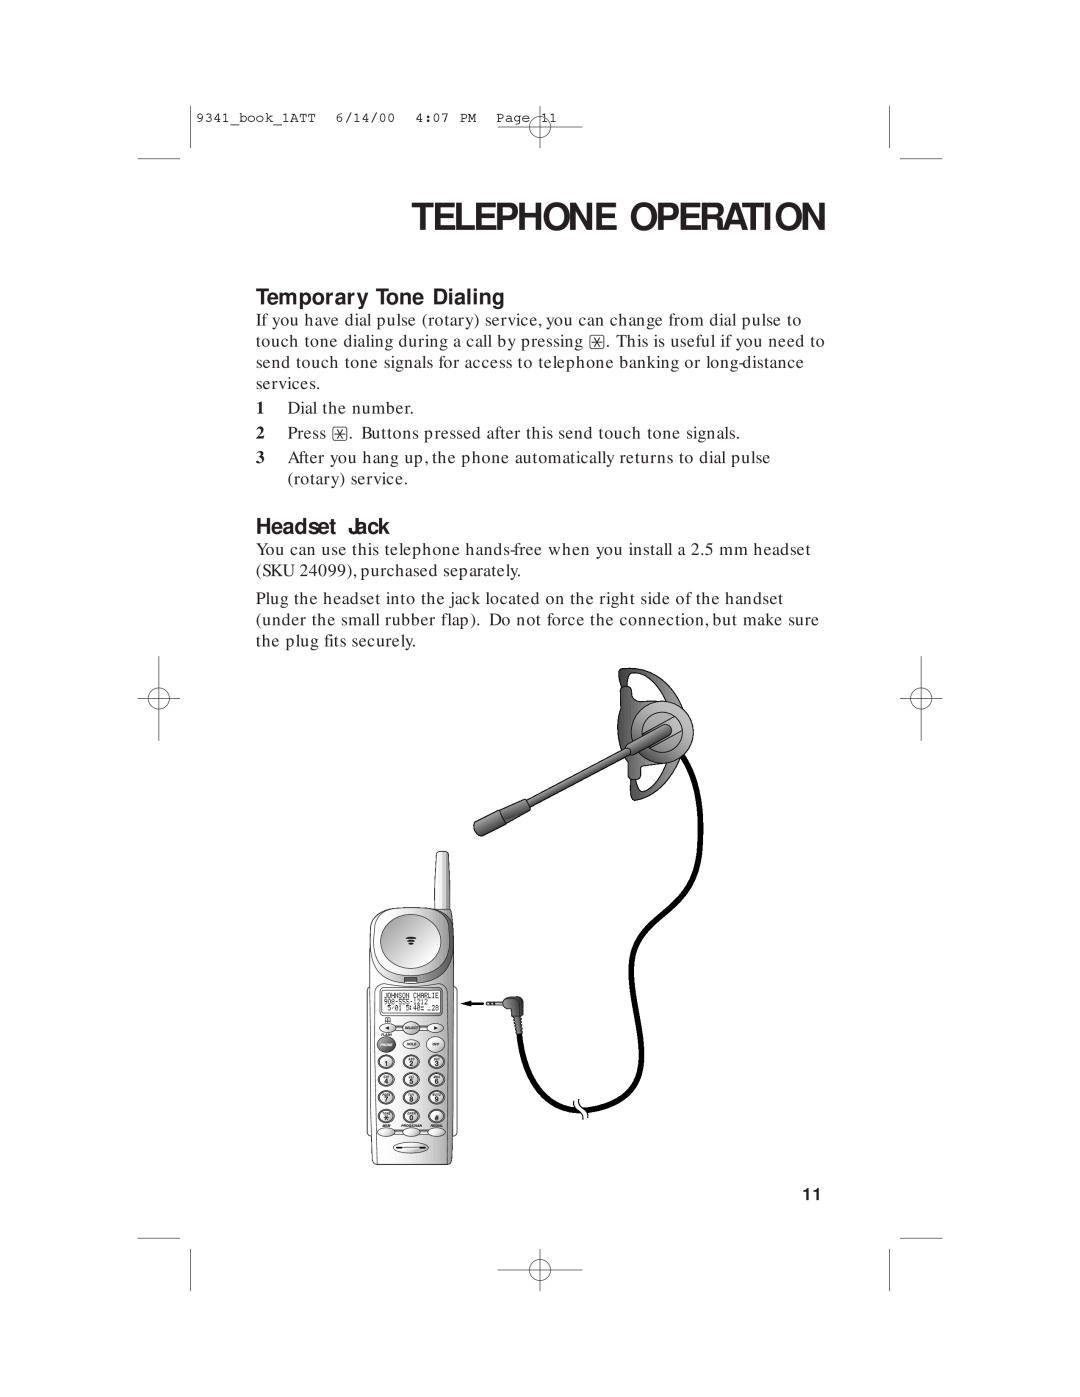 AT&T 9341 user manual Temporary Tone Dialing, Headset Jack, Telephone Operation 